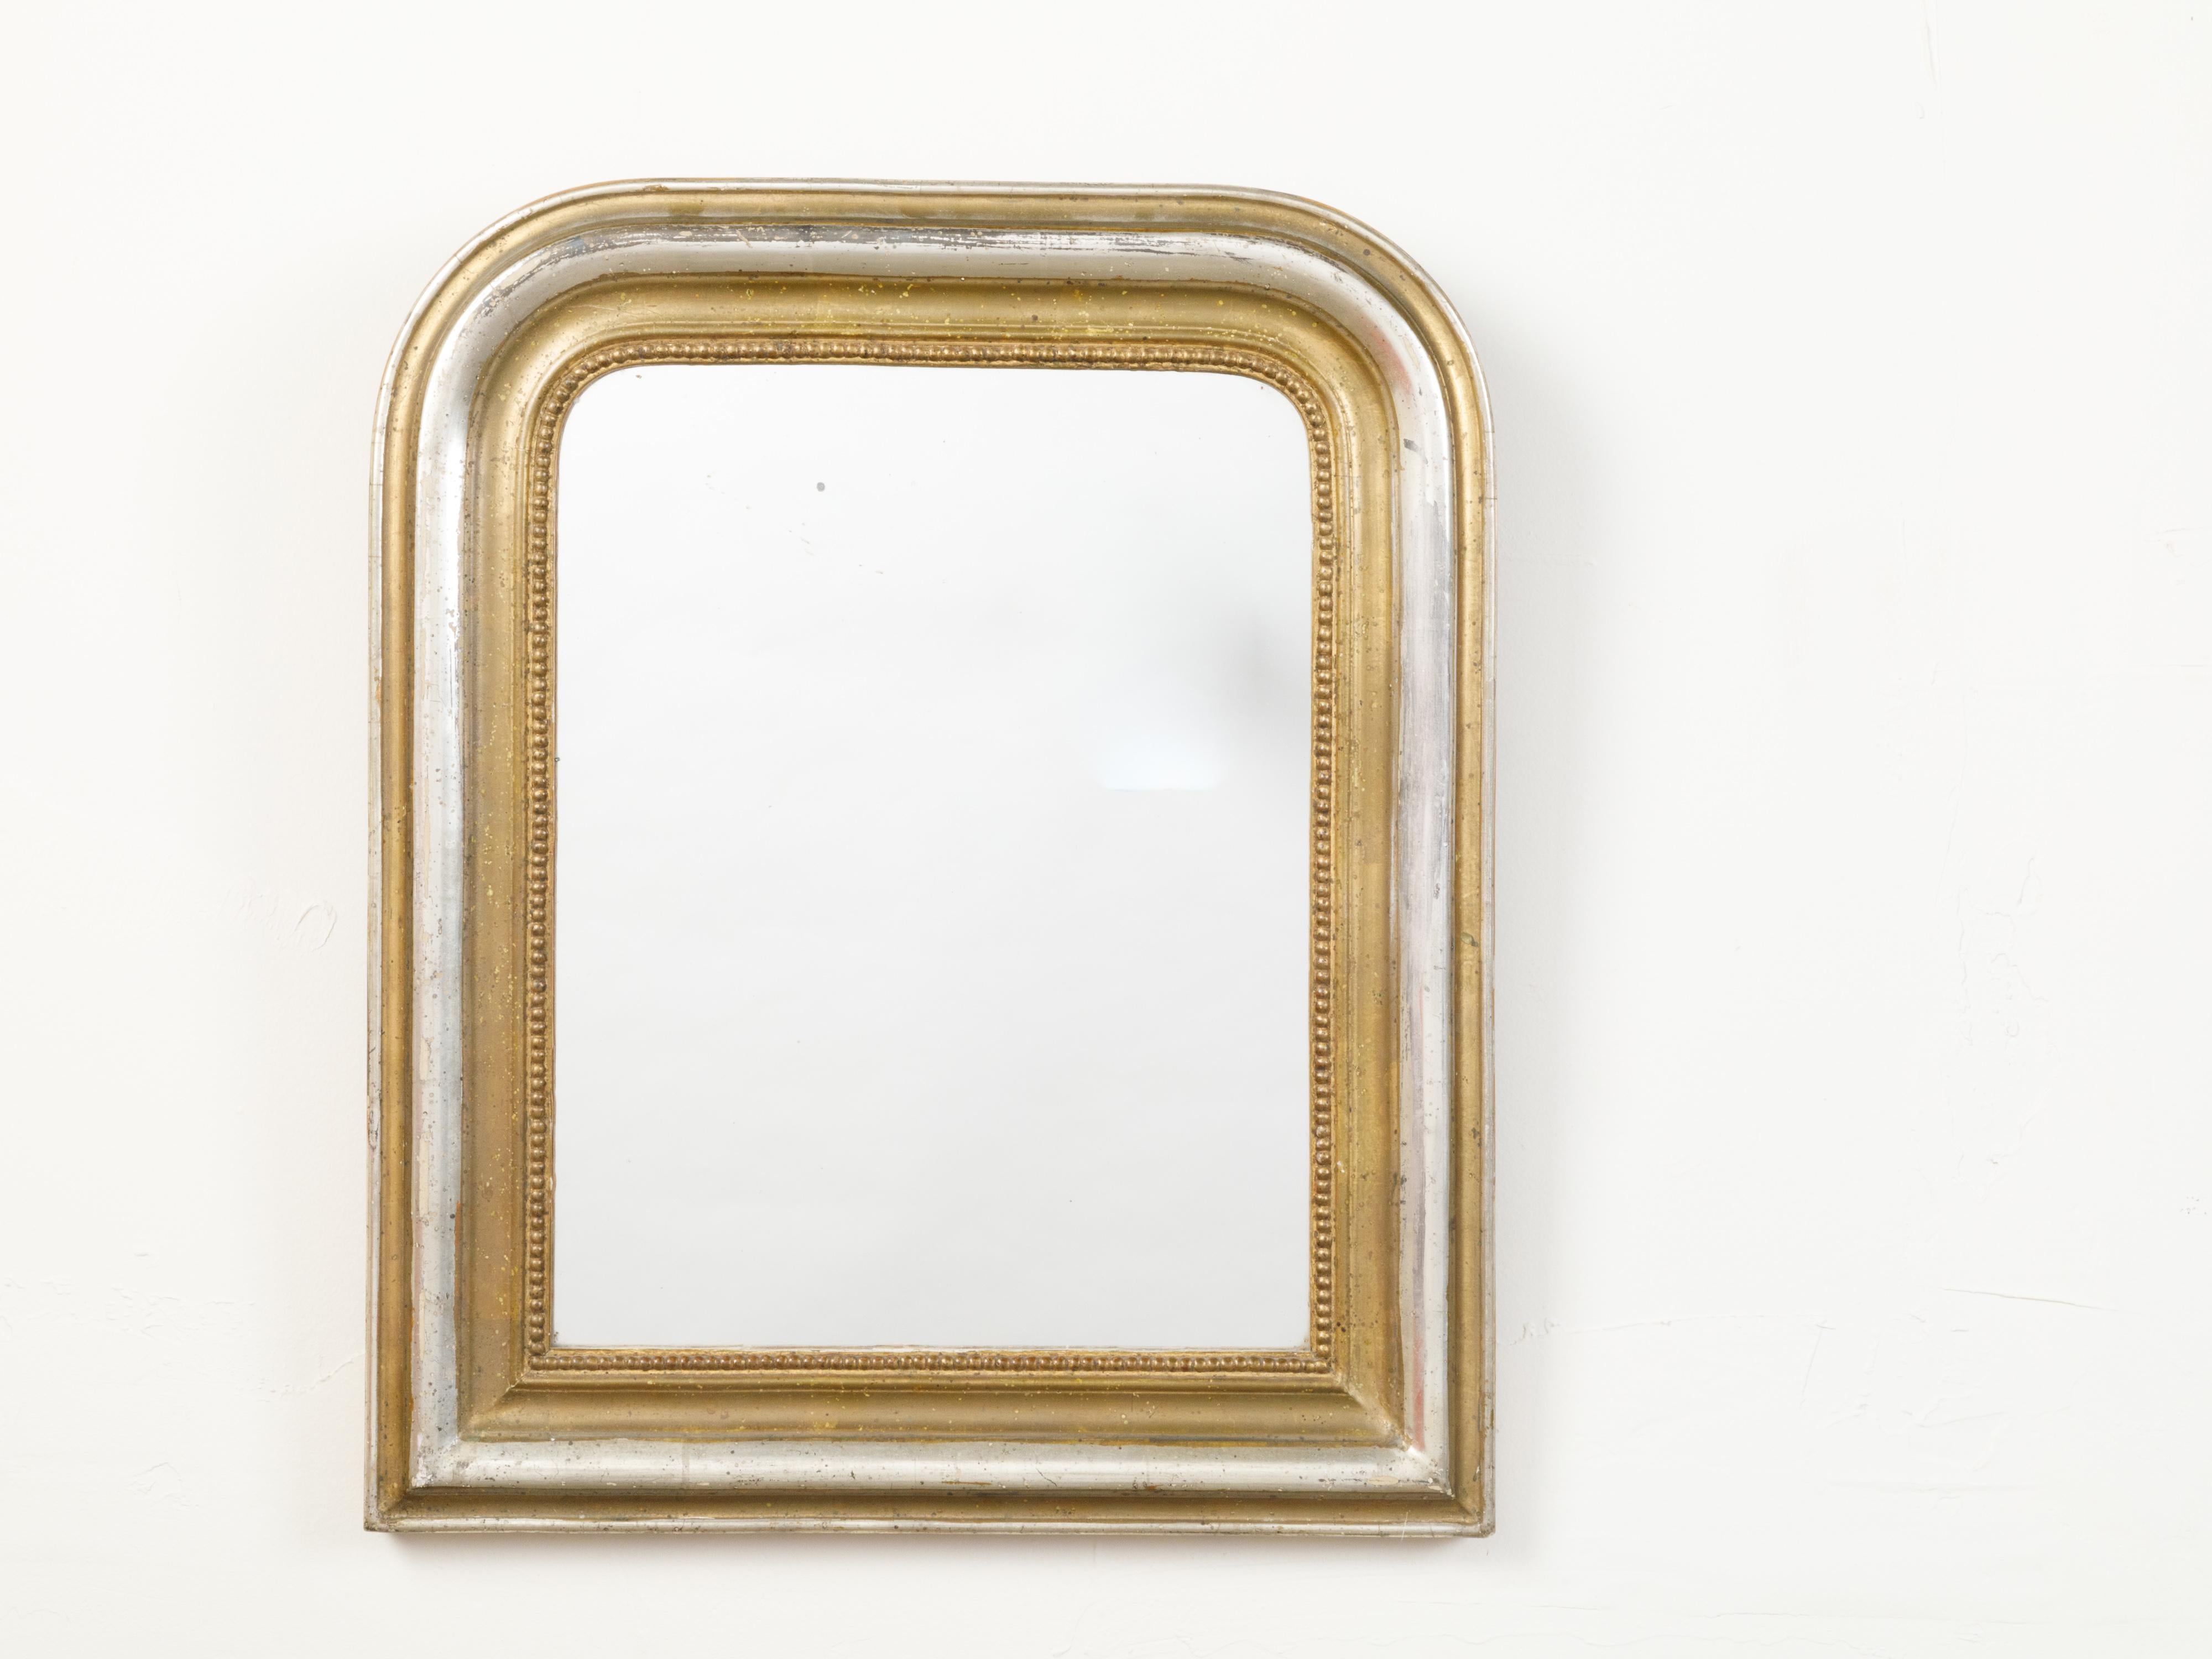 A French Louis-Philippe style mirror from the early 20th century, with silver and gold tones. Created in France at the Turn of the Century, this mirror features the typical Louis-Philippe silhouette accented with rounded corners at the top.